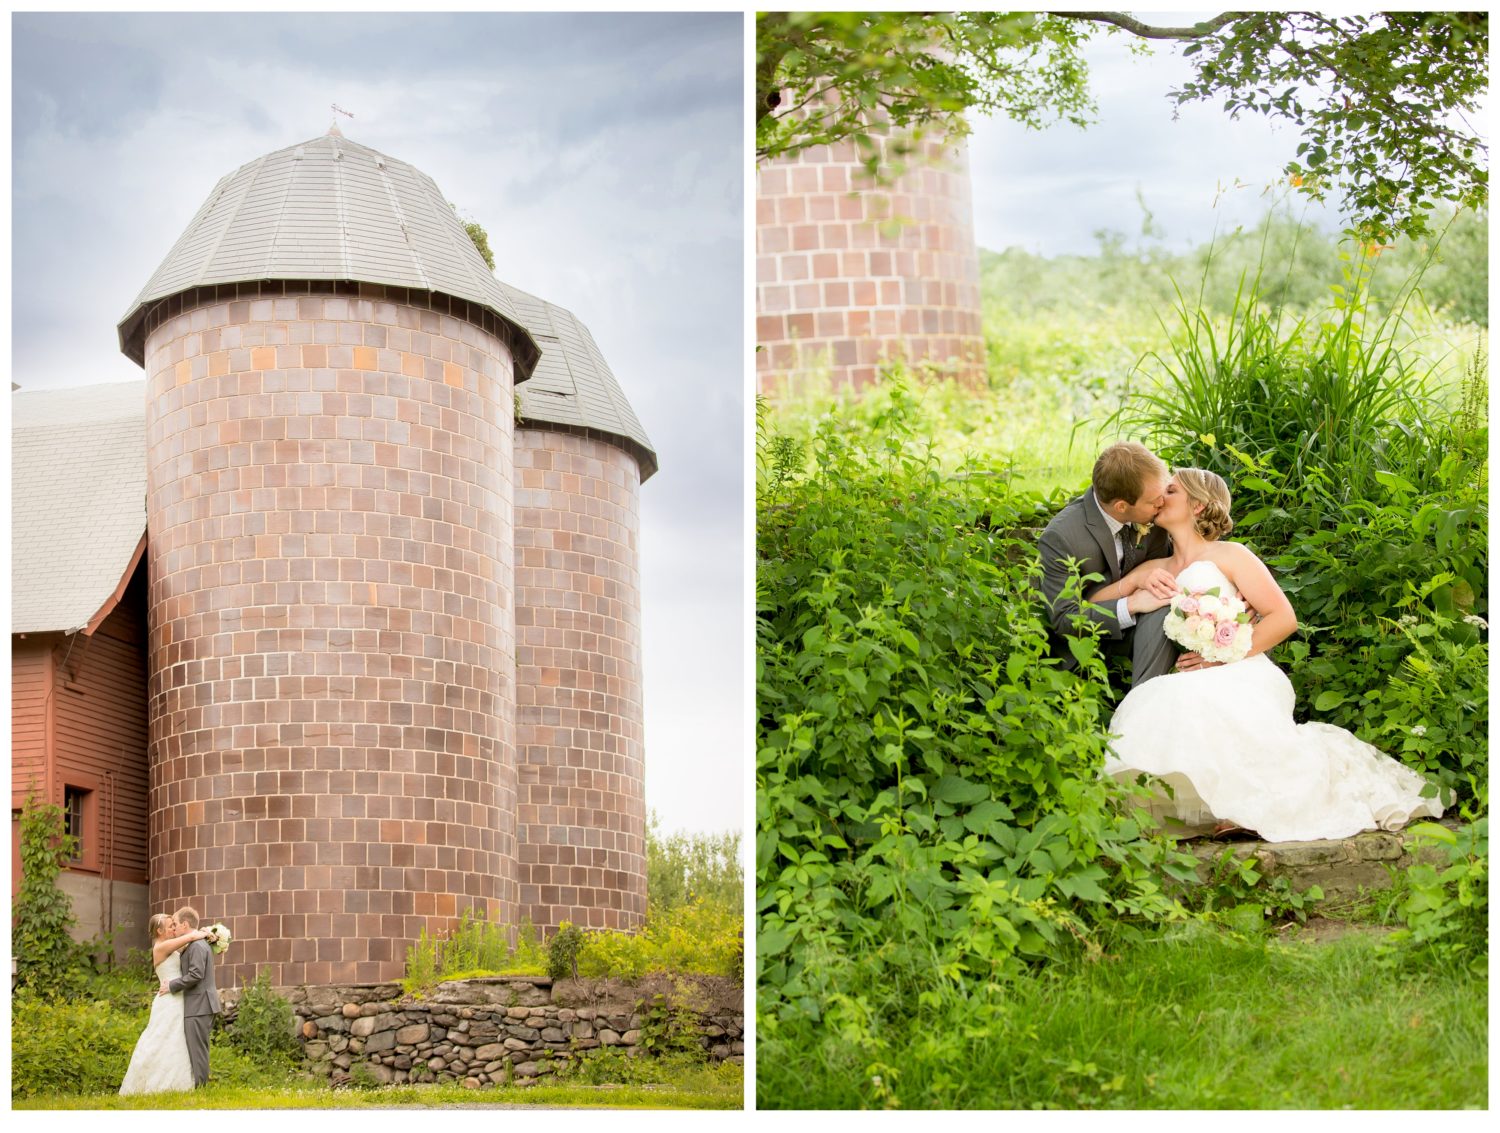 Creative Portraits of Couple on Rustic New England Wedding day. QuonQuont farm Whately MA